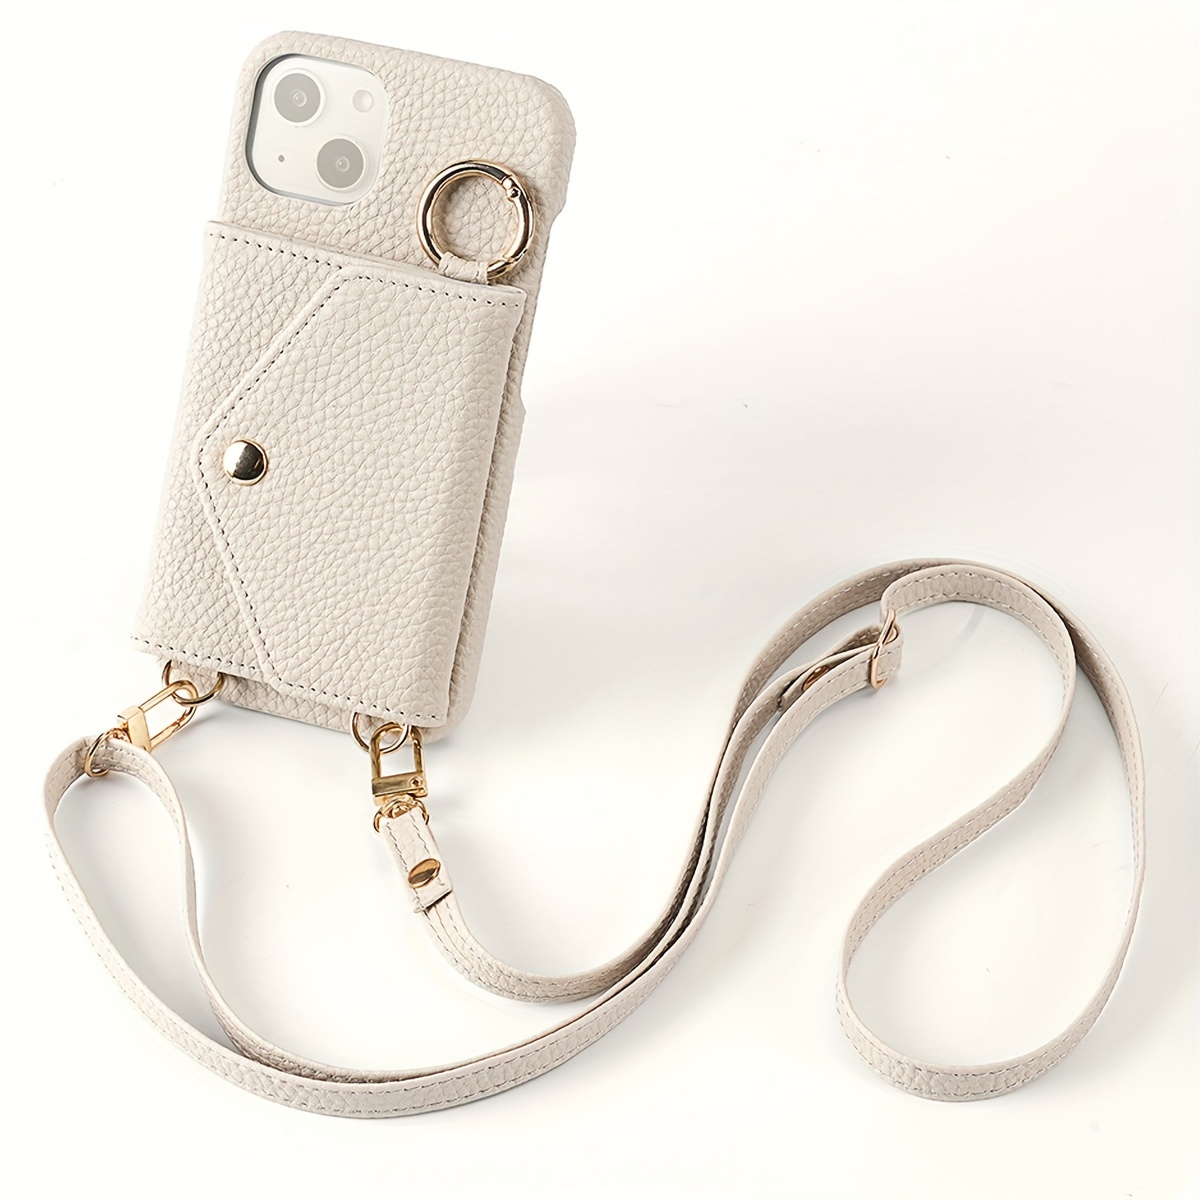 Pearl Wirst Strap Crossbody Phone Case for iPhone 12 14 1 11 Pro